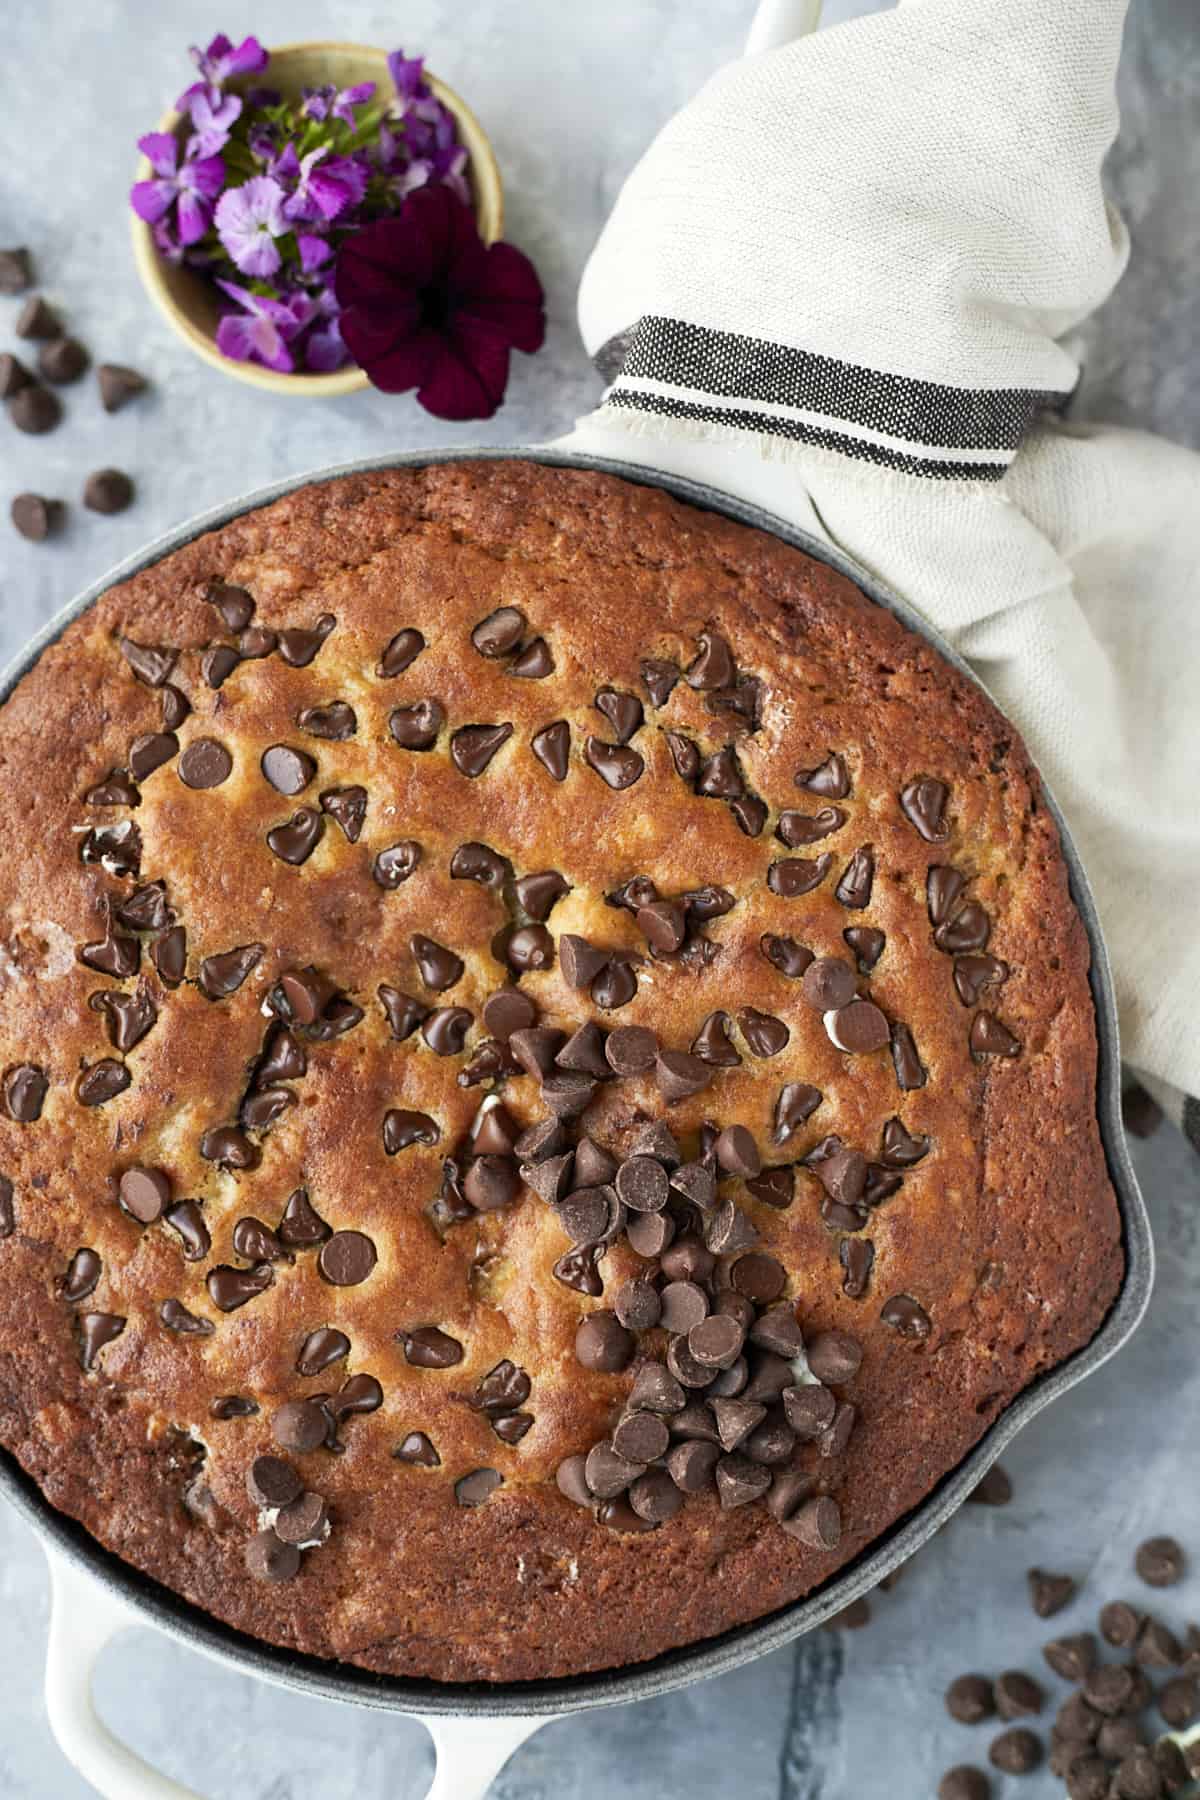 overhead of the skillet banana bread with chocolate chips on top and dressed up with a towel and flowers